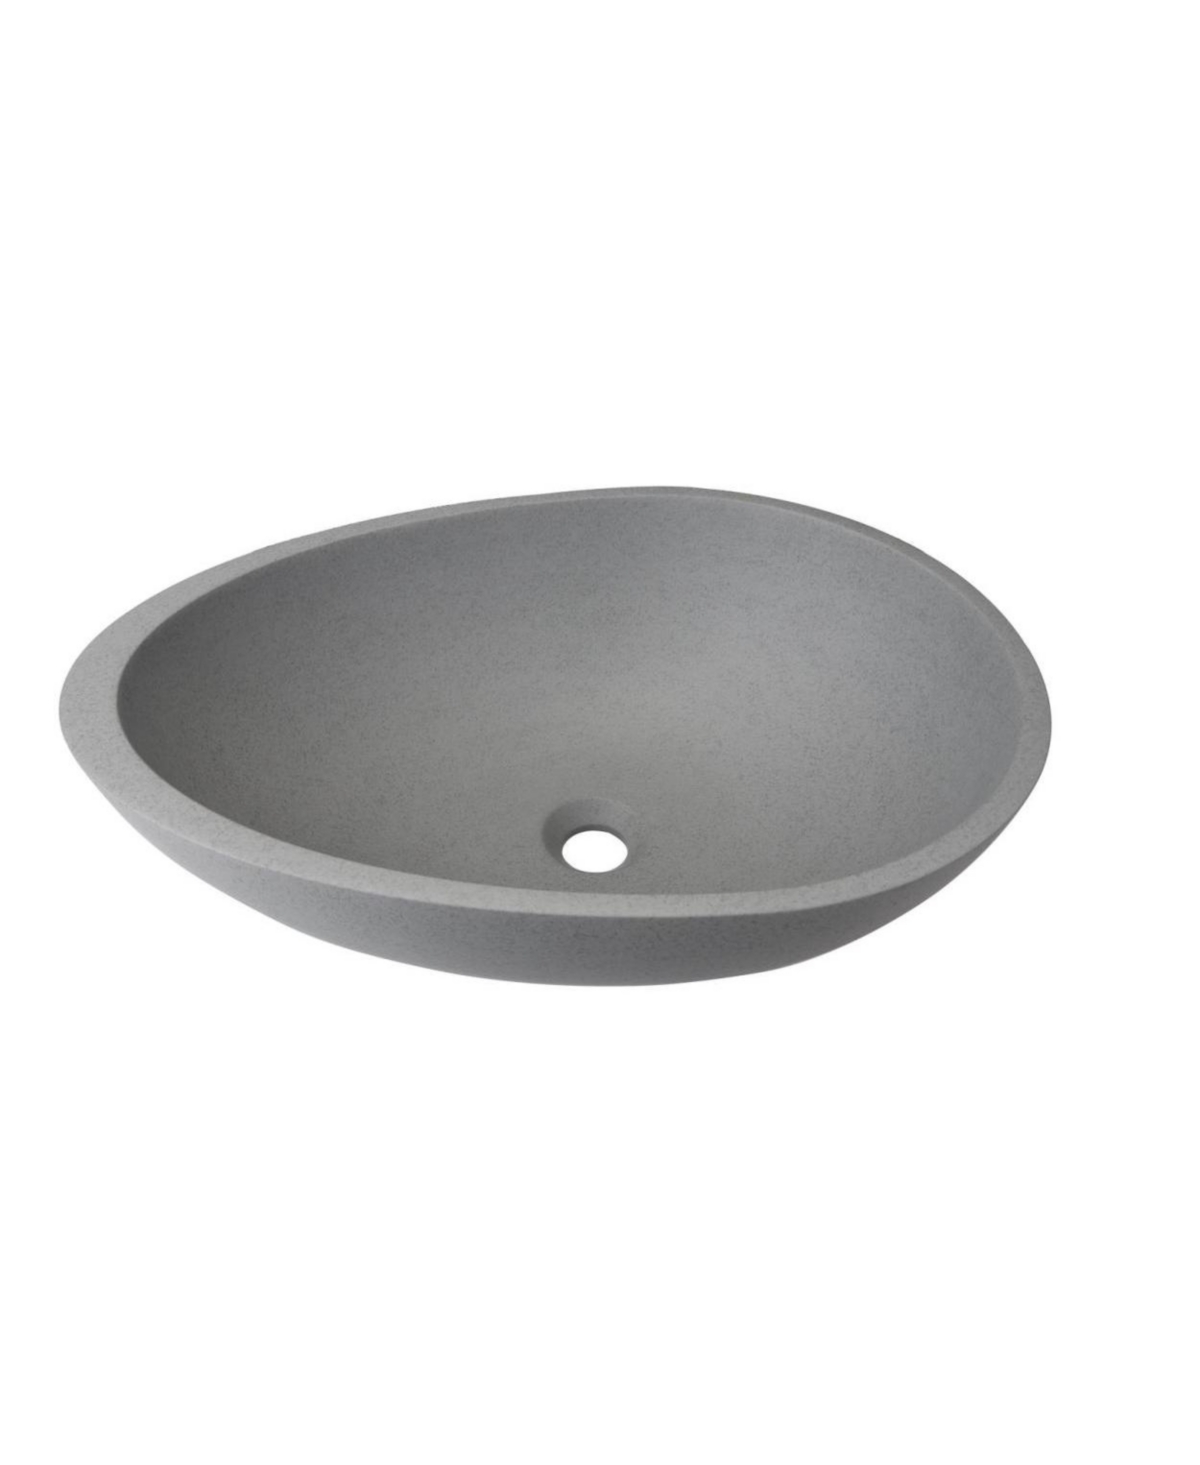 Egg Shaped Concrete Vessel Bathroom Sink In Grey Without Faucet